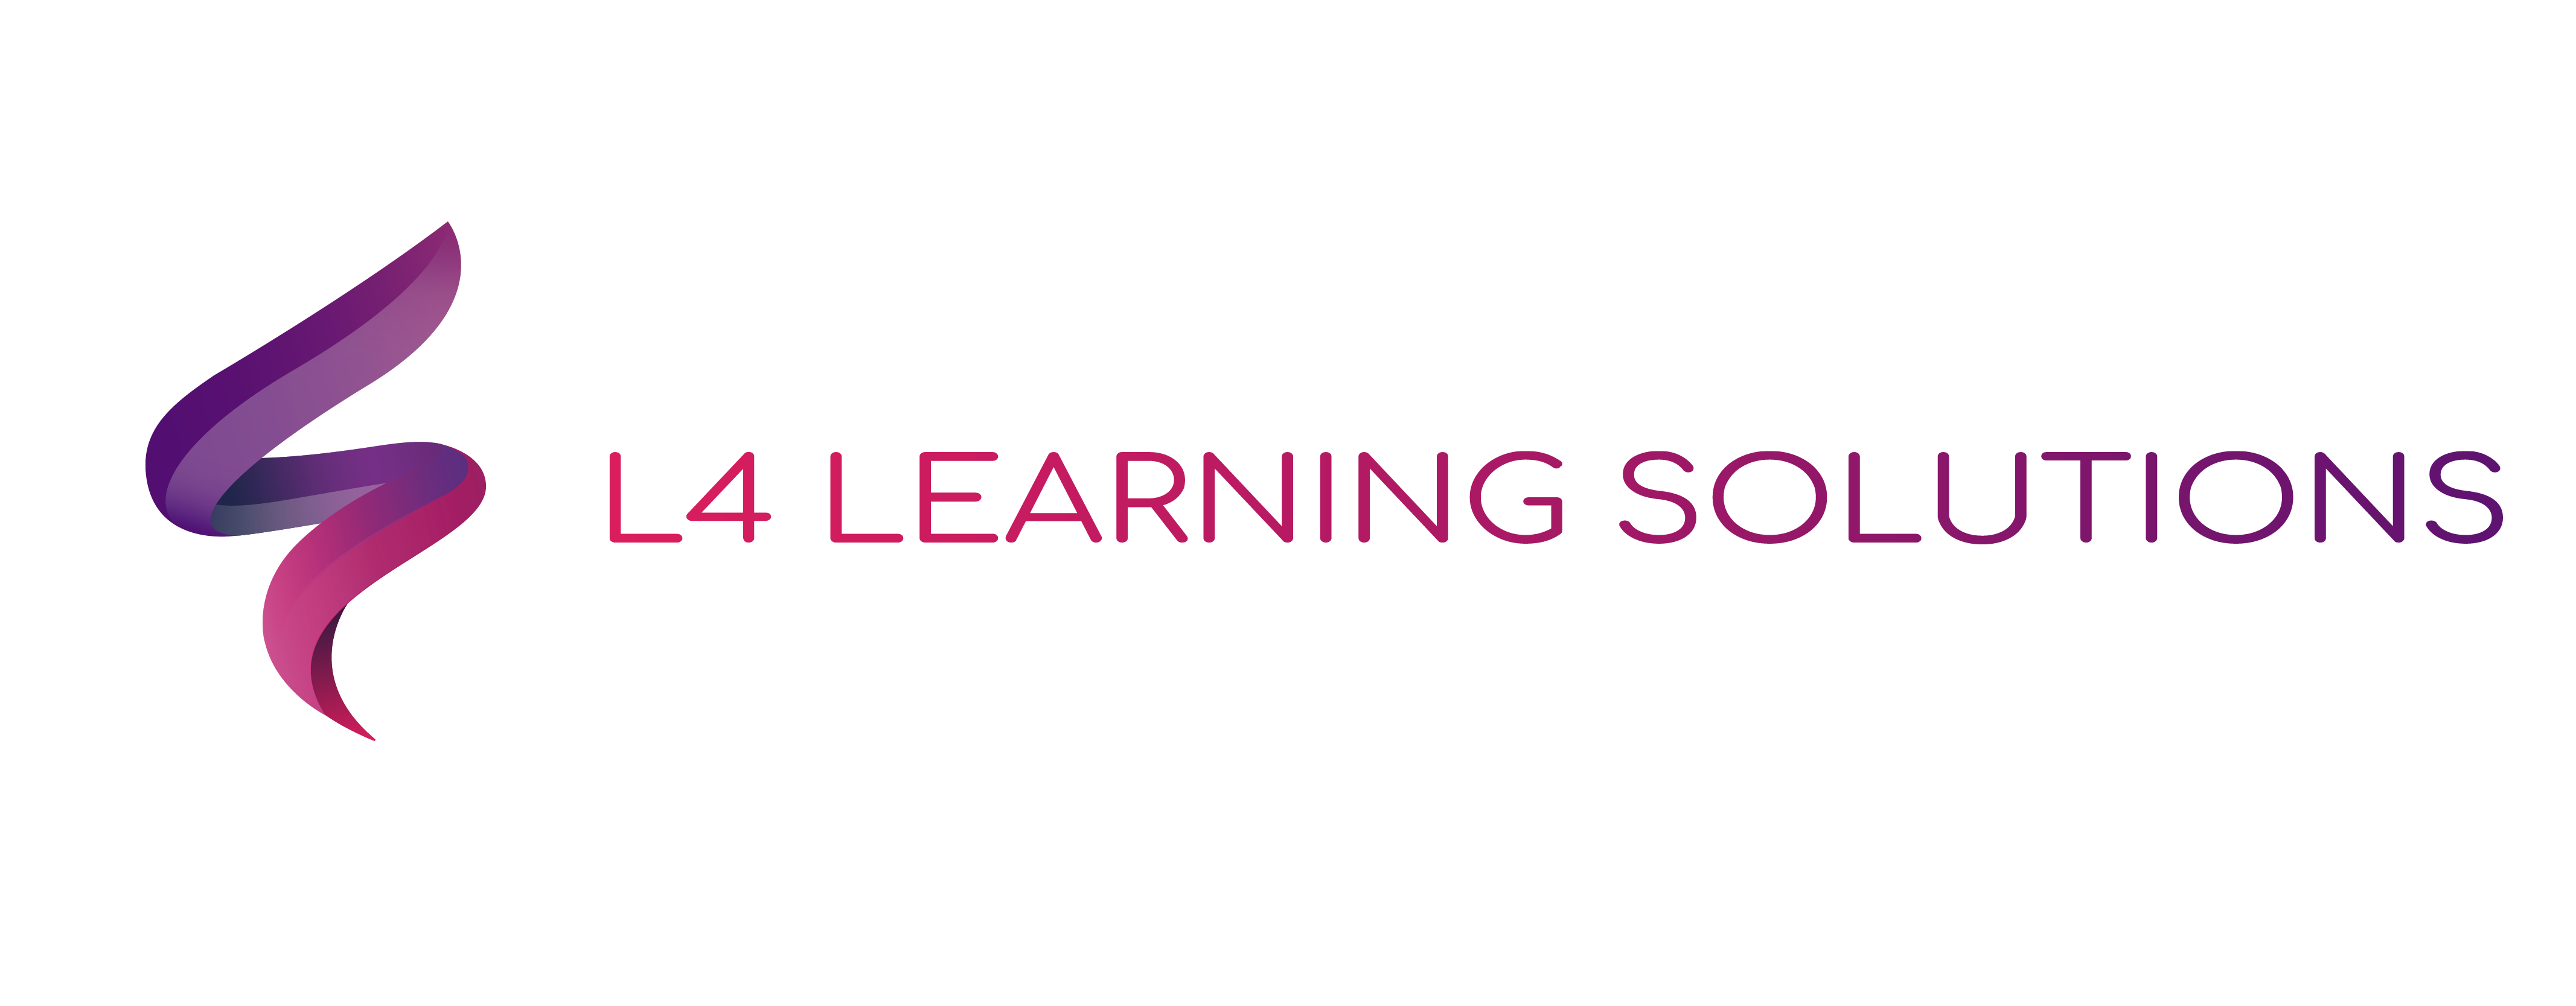 L4 Learning Solutions